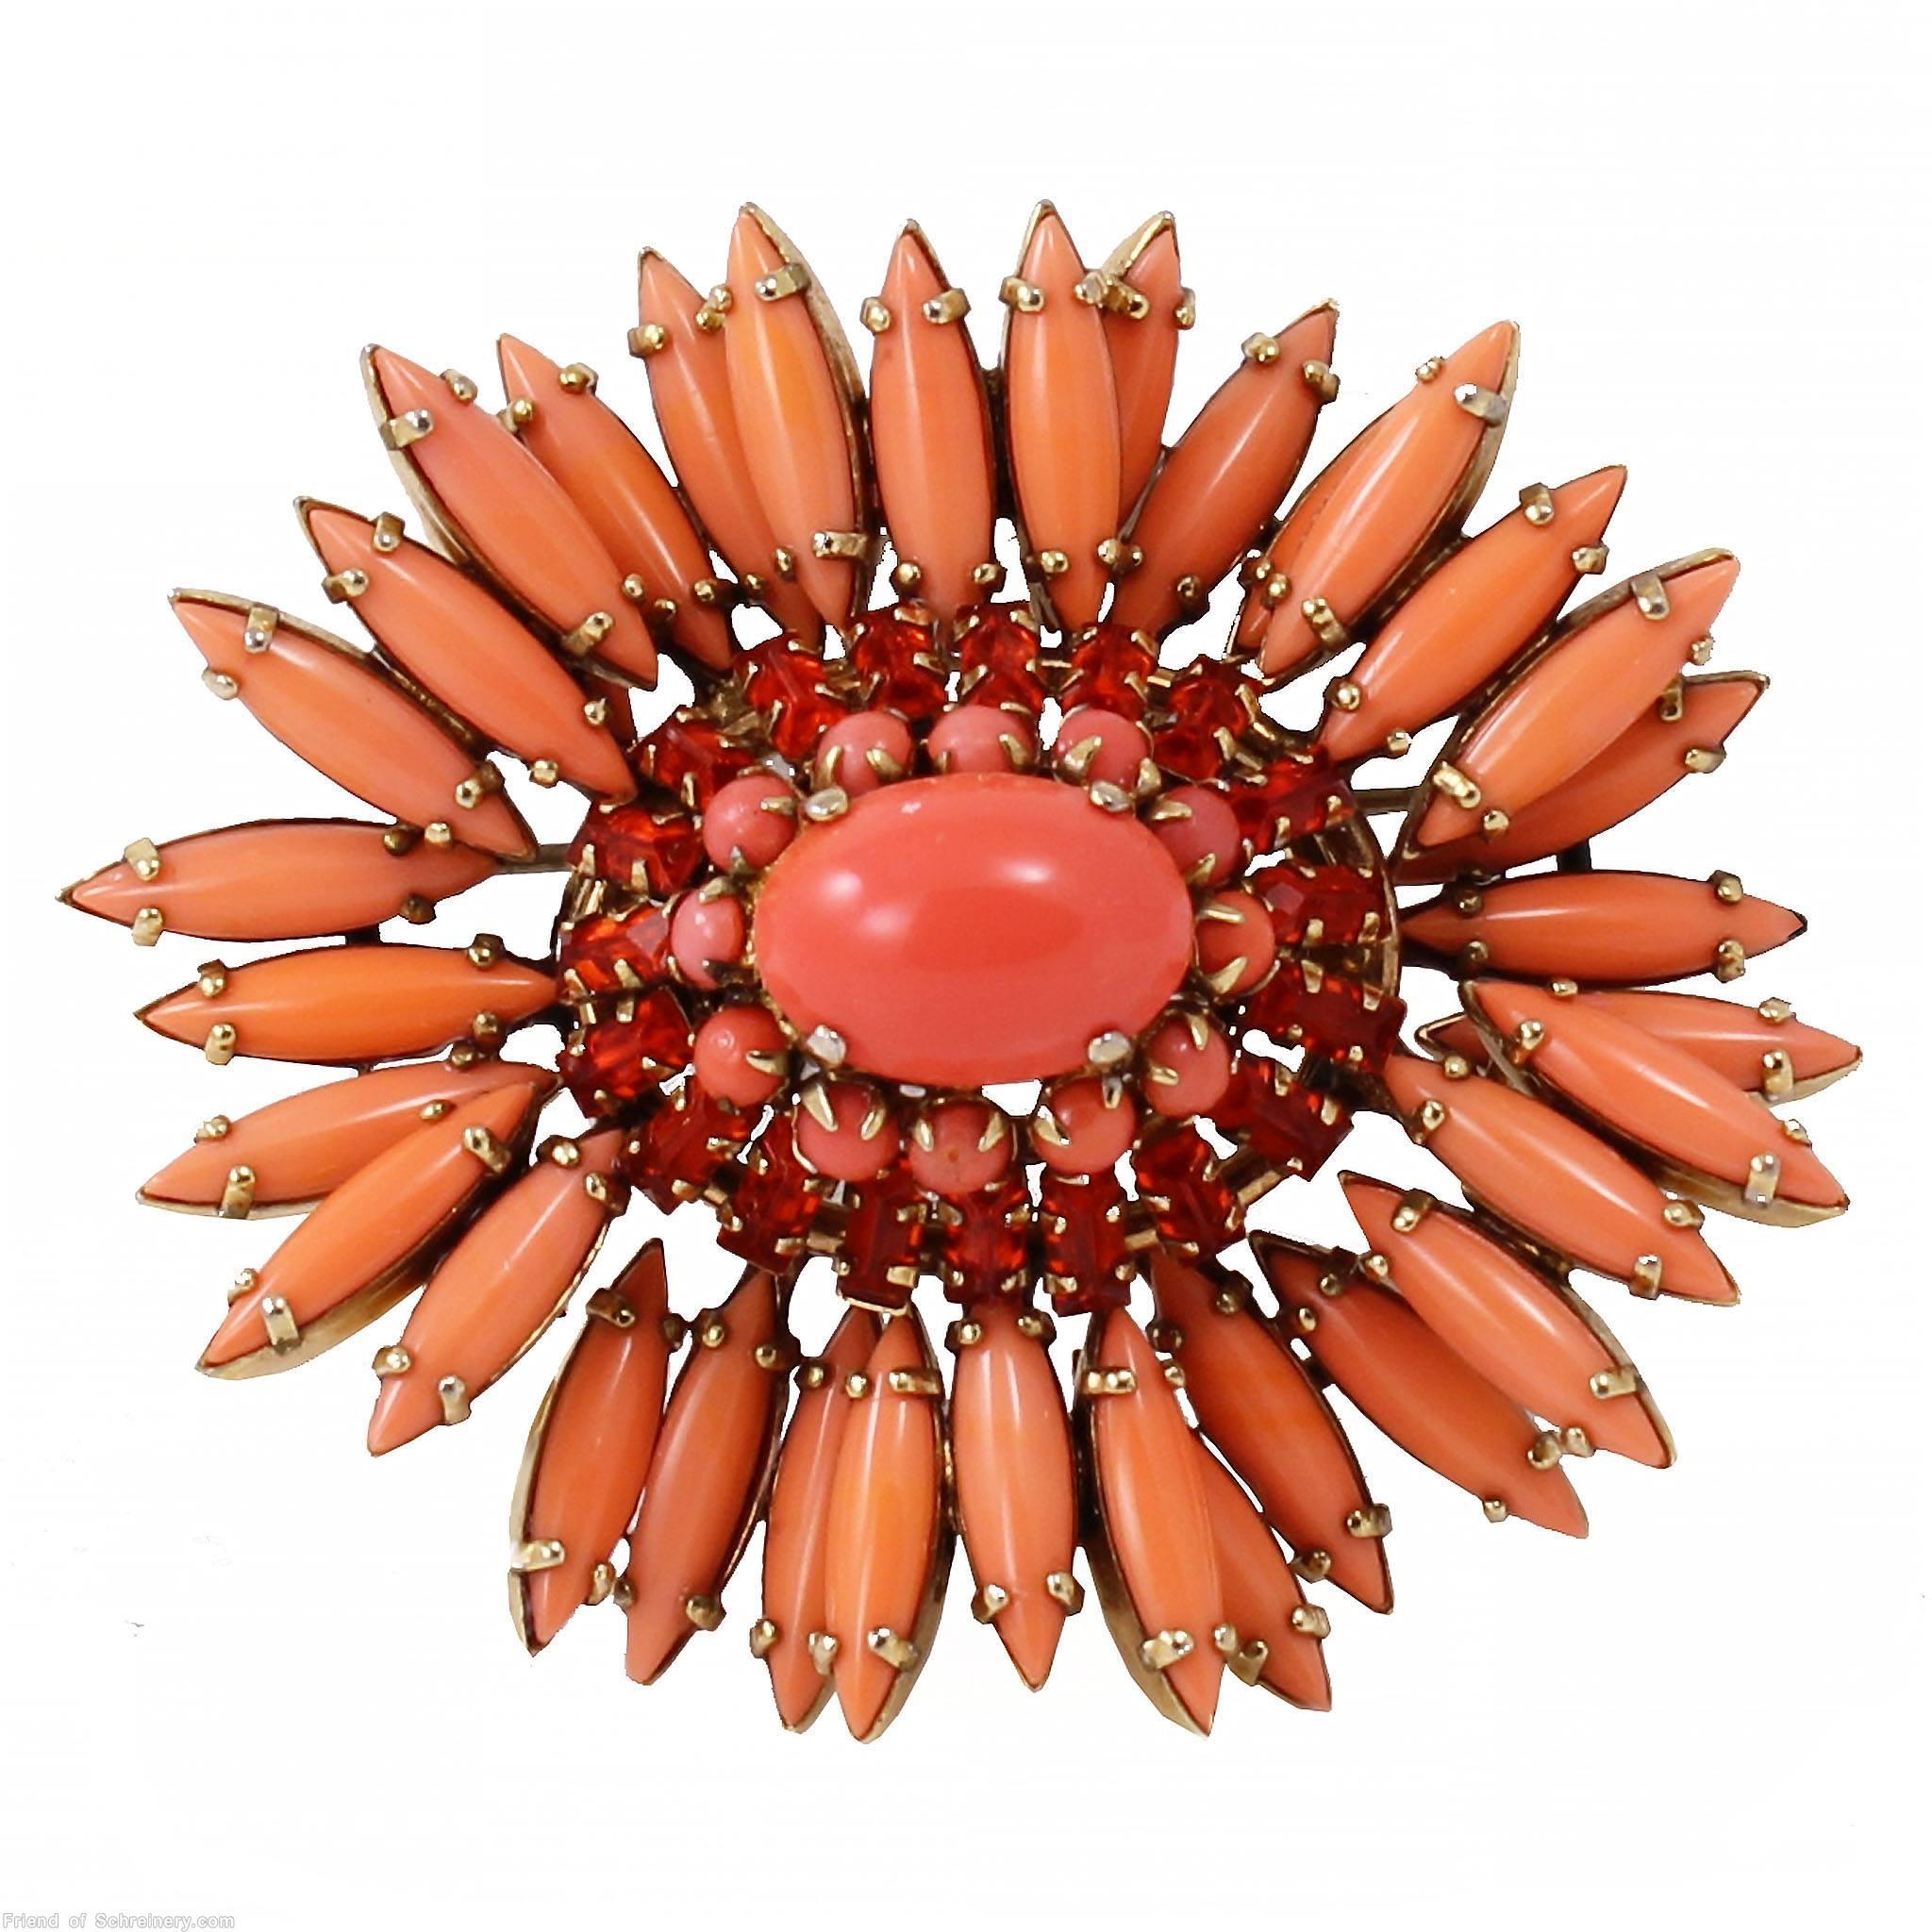 Schreiner navette ruffle pin hook eye domed oval center 2 rounds surrounding stone coral siam red small baguette goldtone jewelry